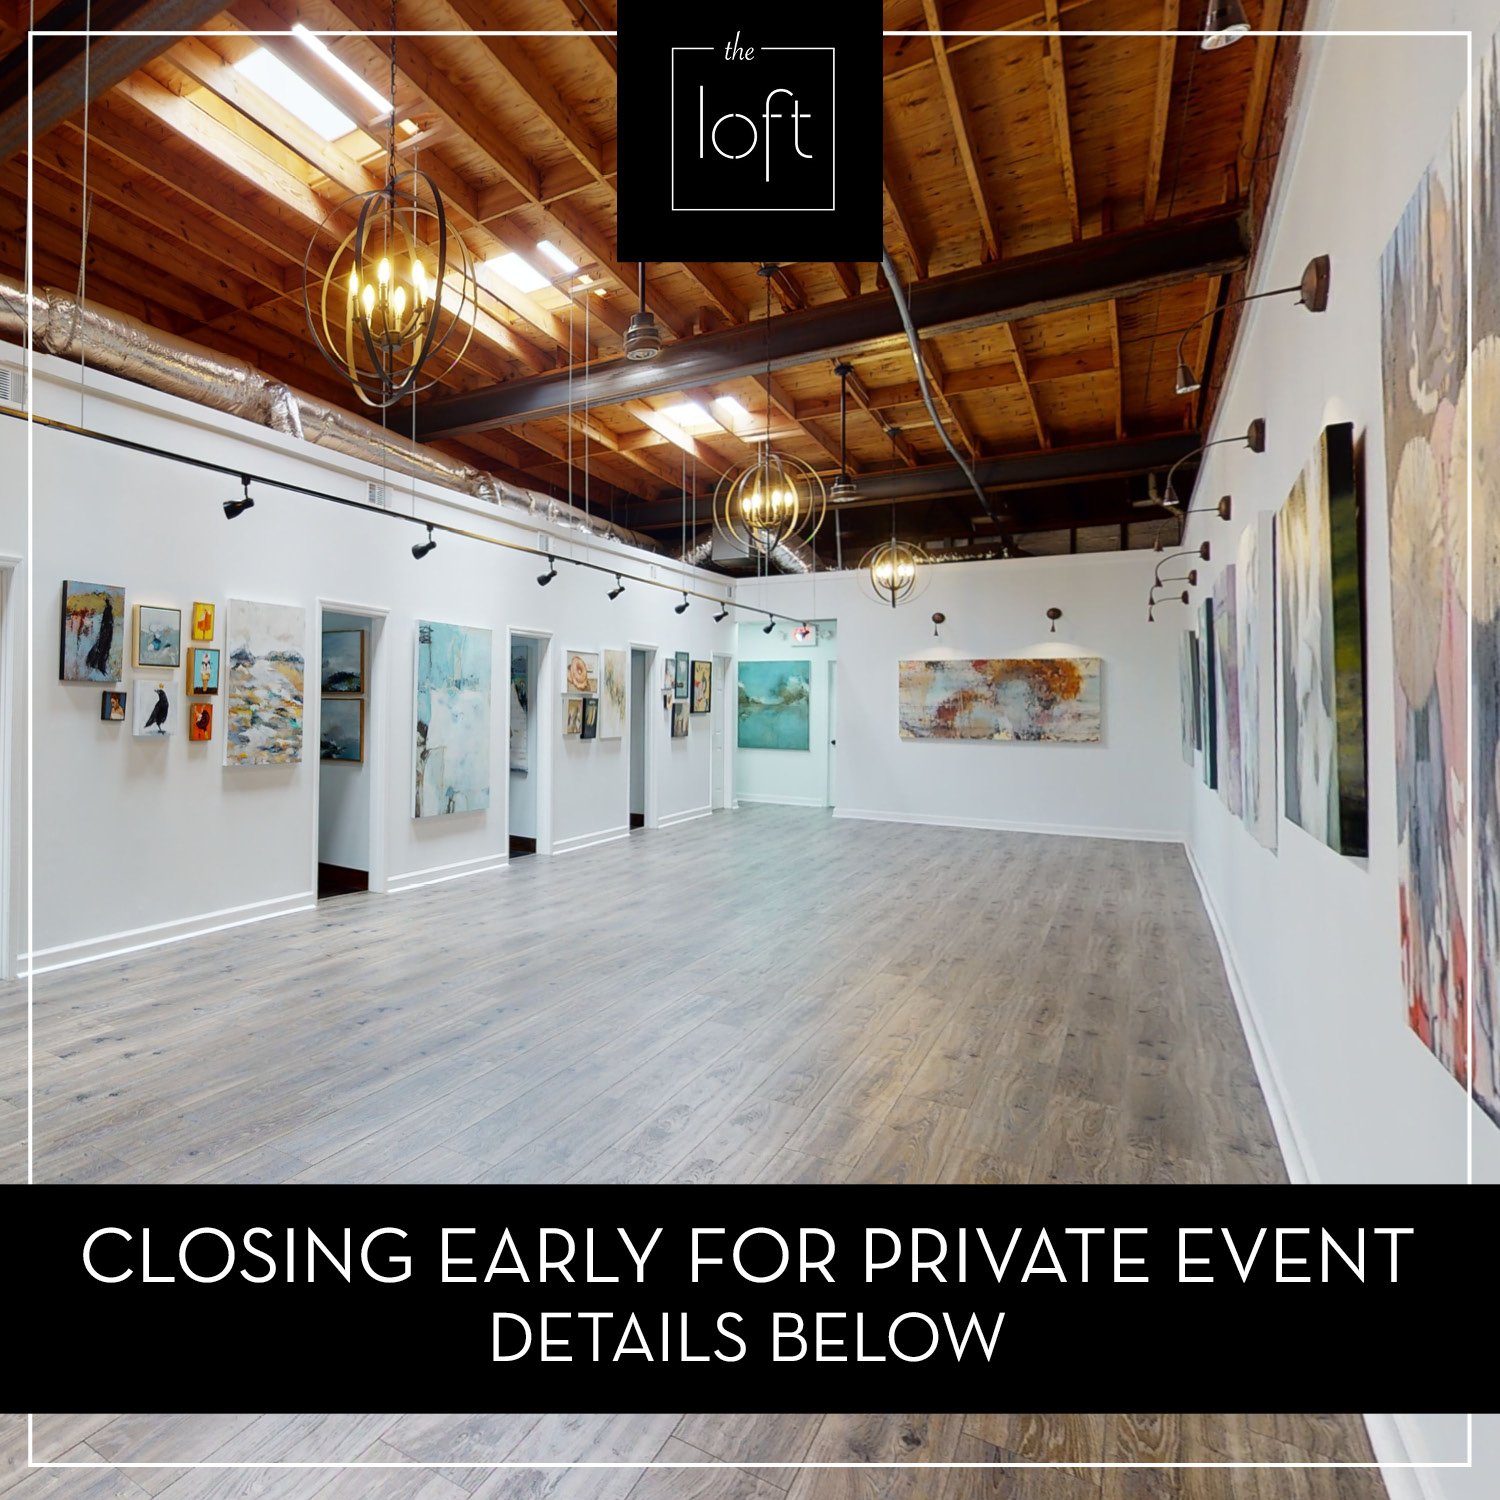 Please note, The Loft will be closing at 4:00pm today for a private event. Visit our website for more information on how to host your next event at The Loft!